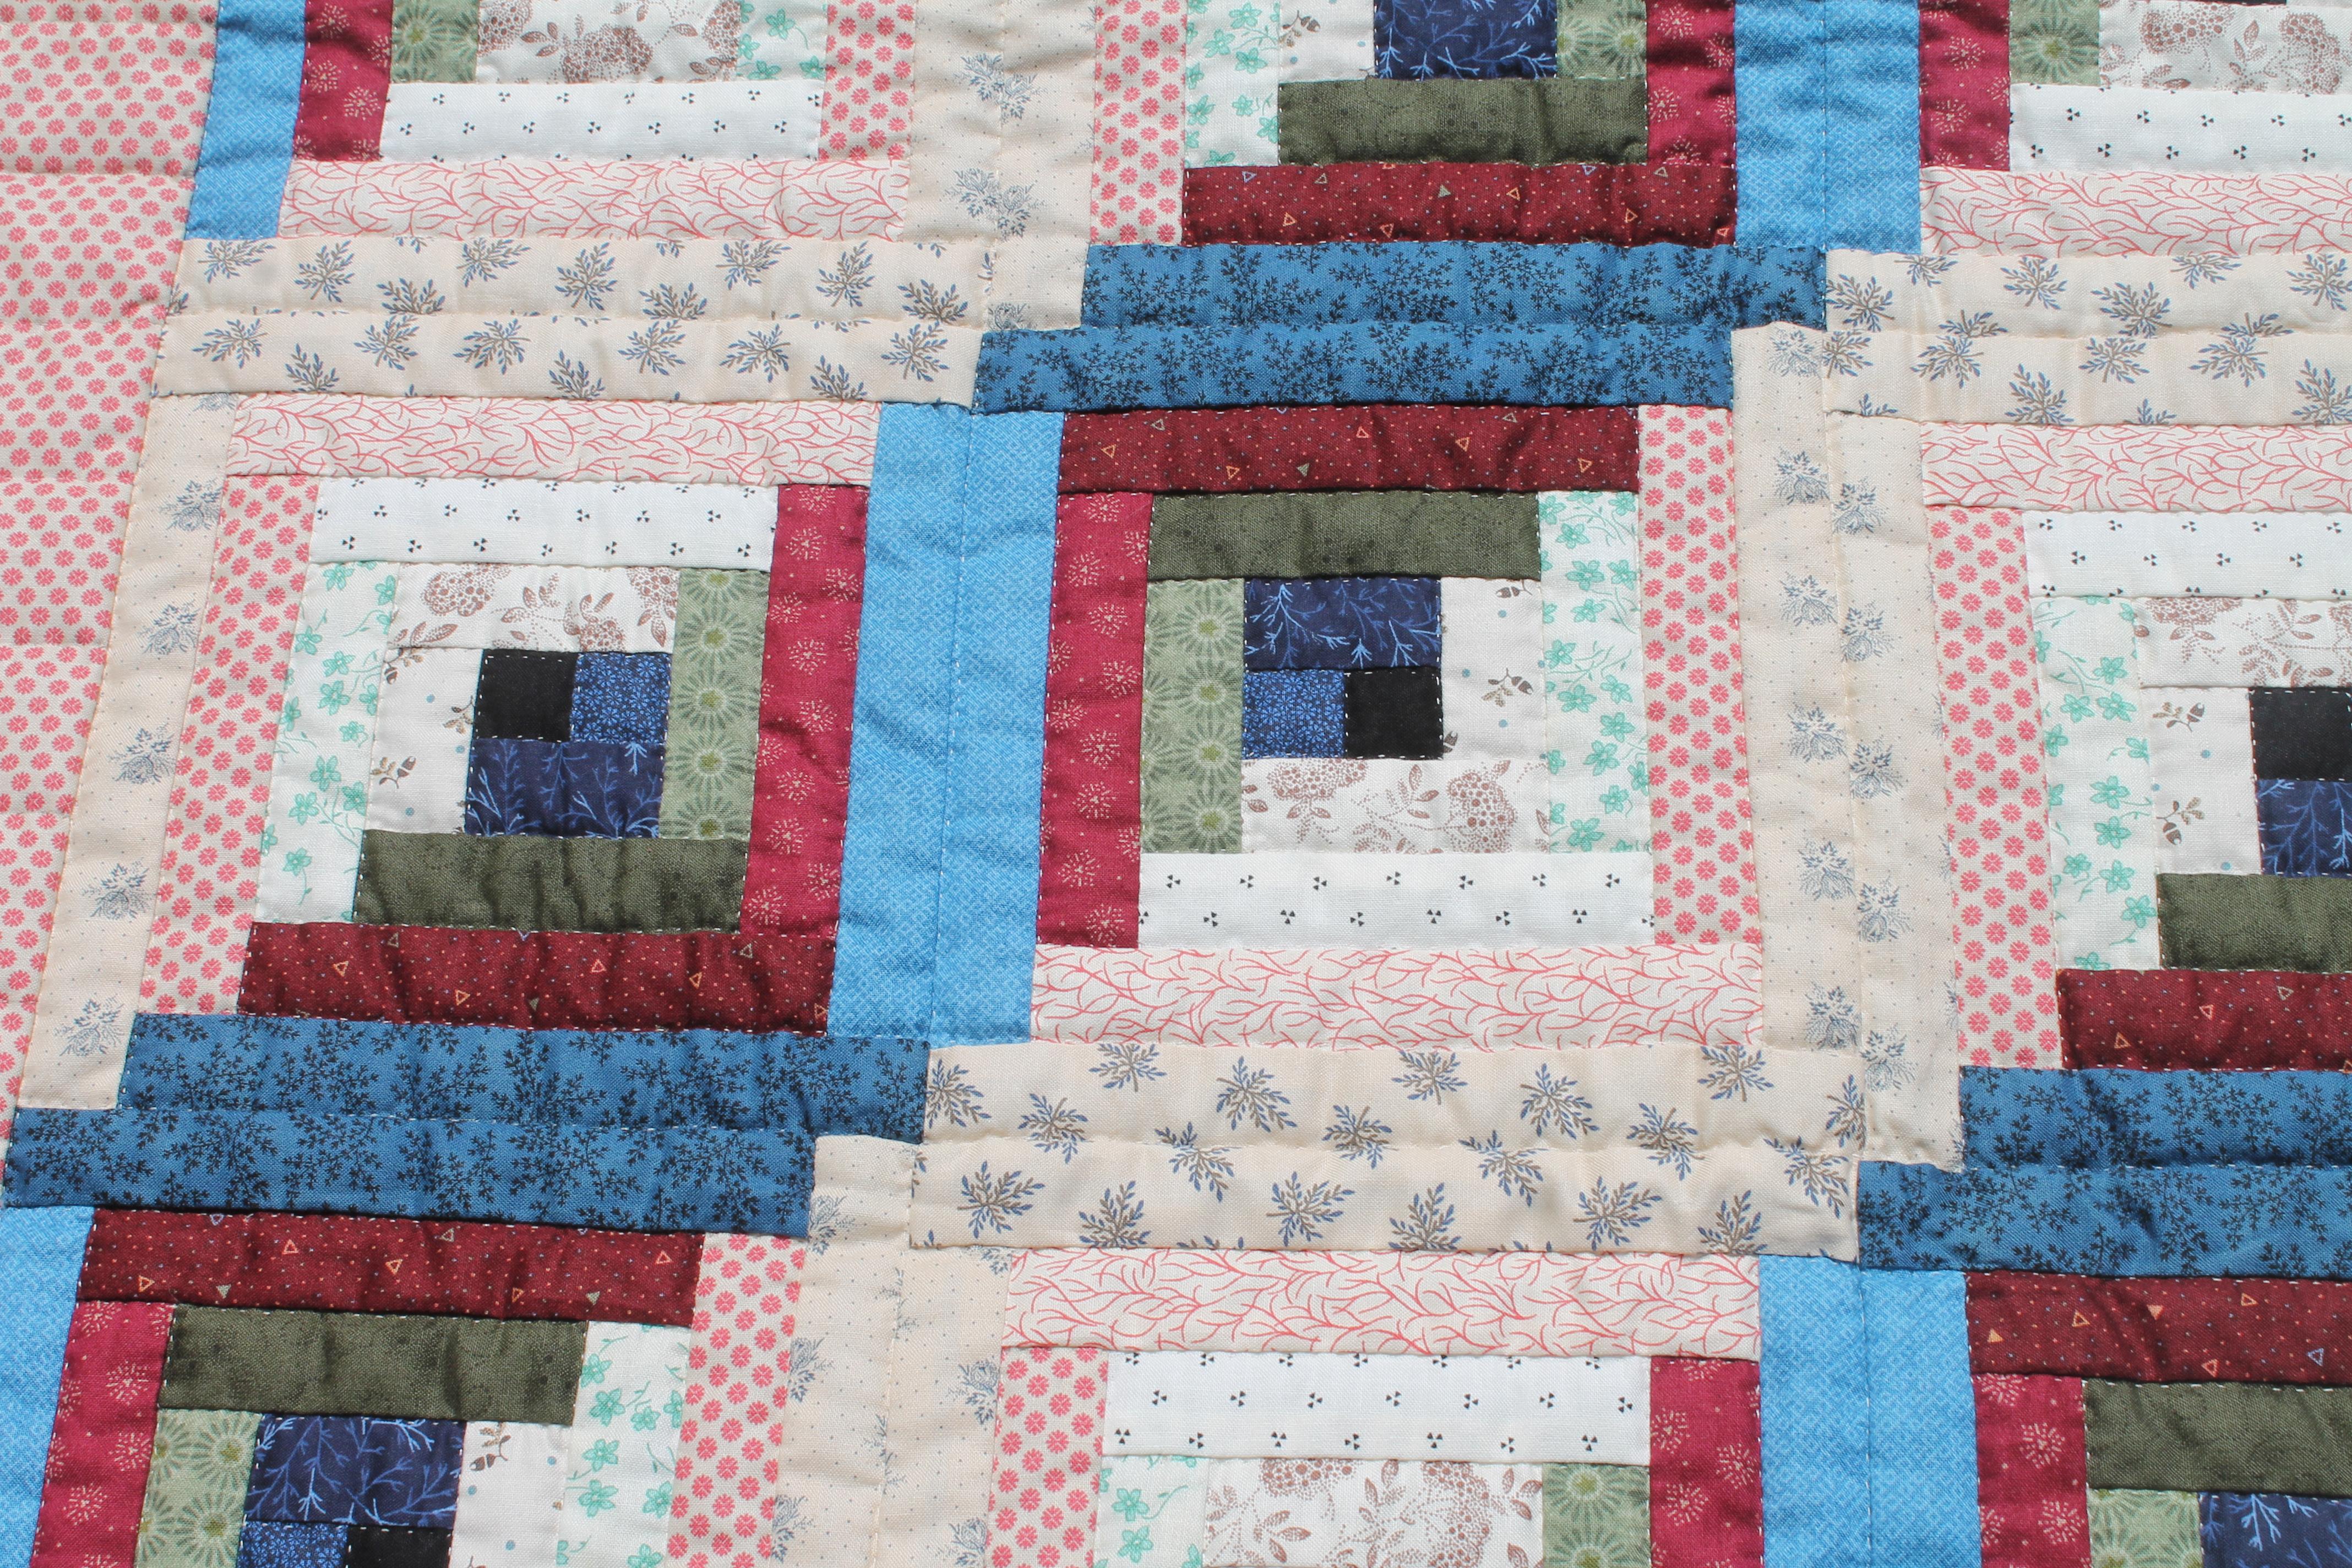 Country Log Cabin Crib Quilt from Pennsylvania